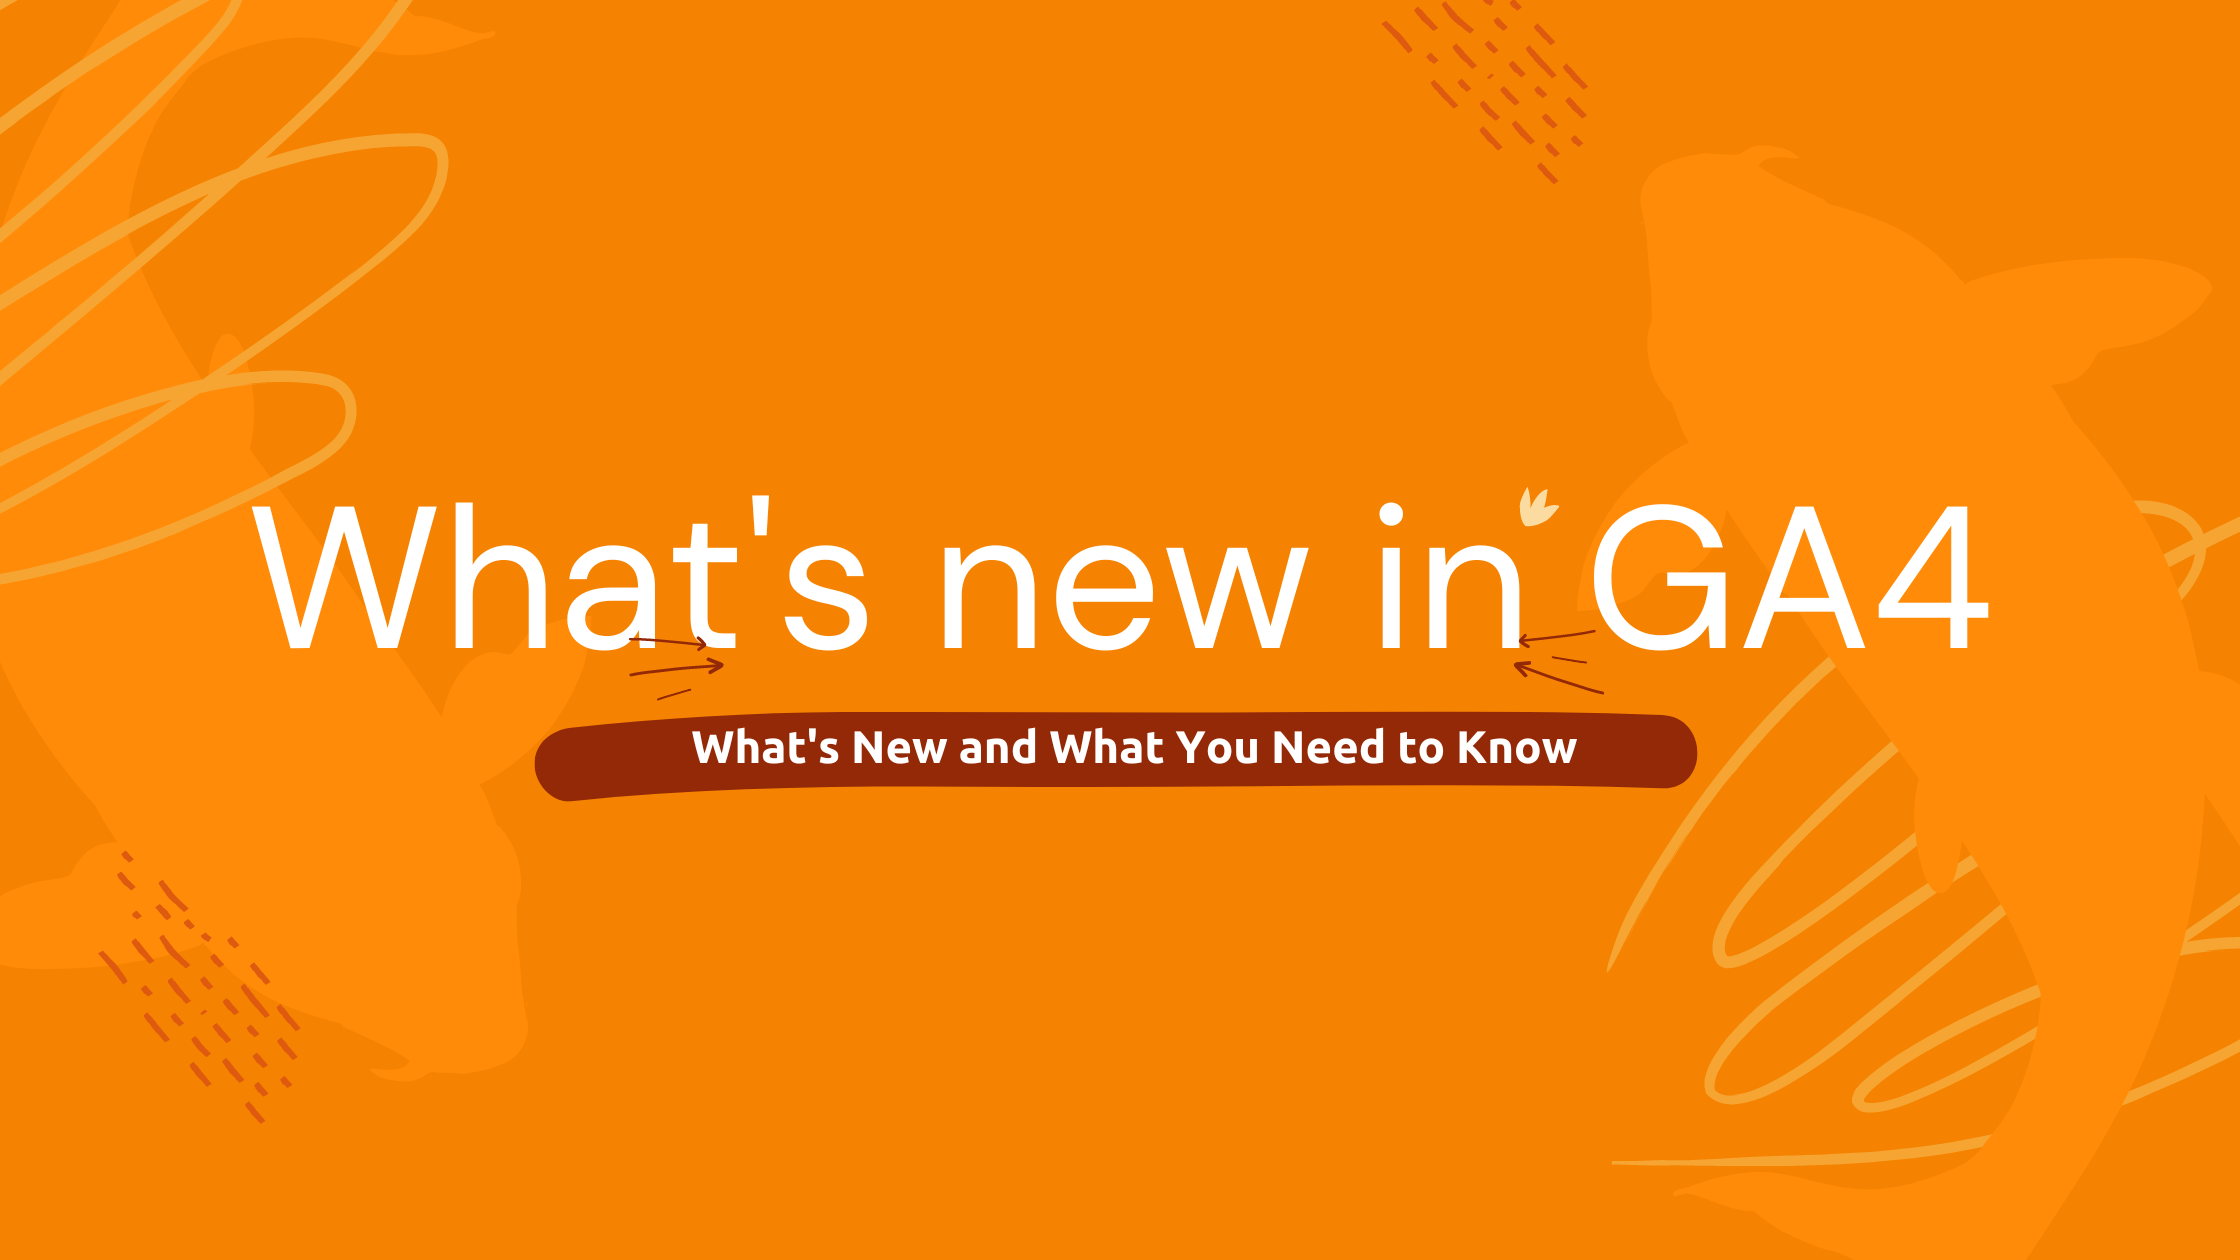 GA4: What’s New and What You Need to Know